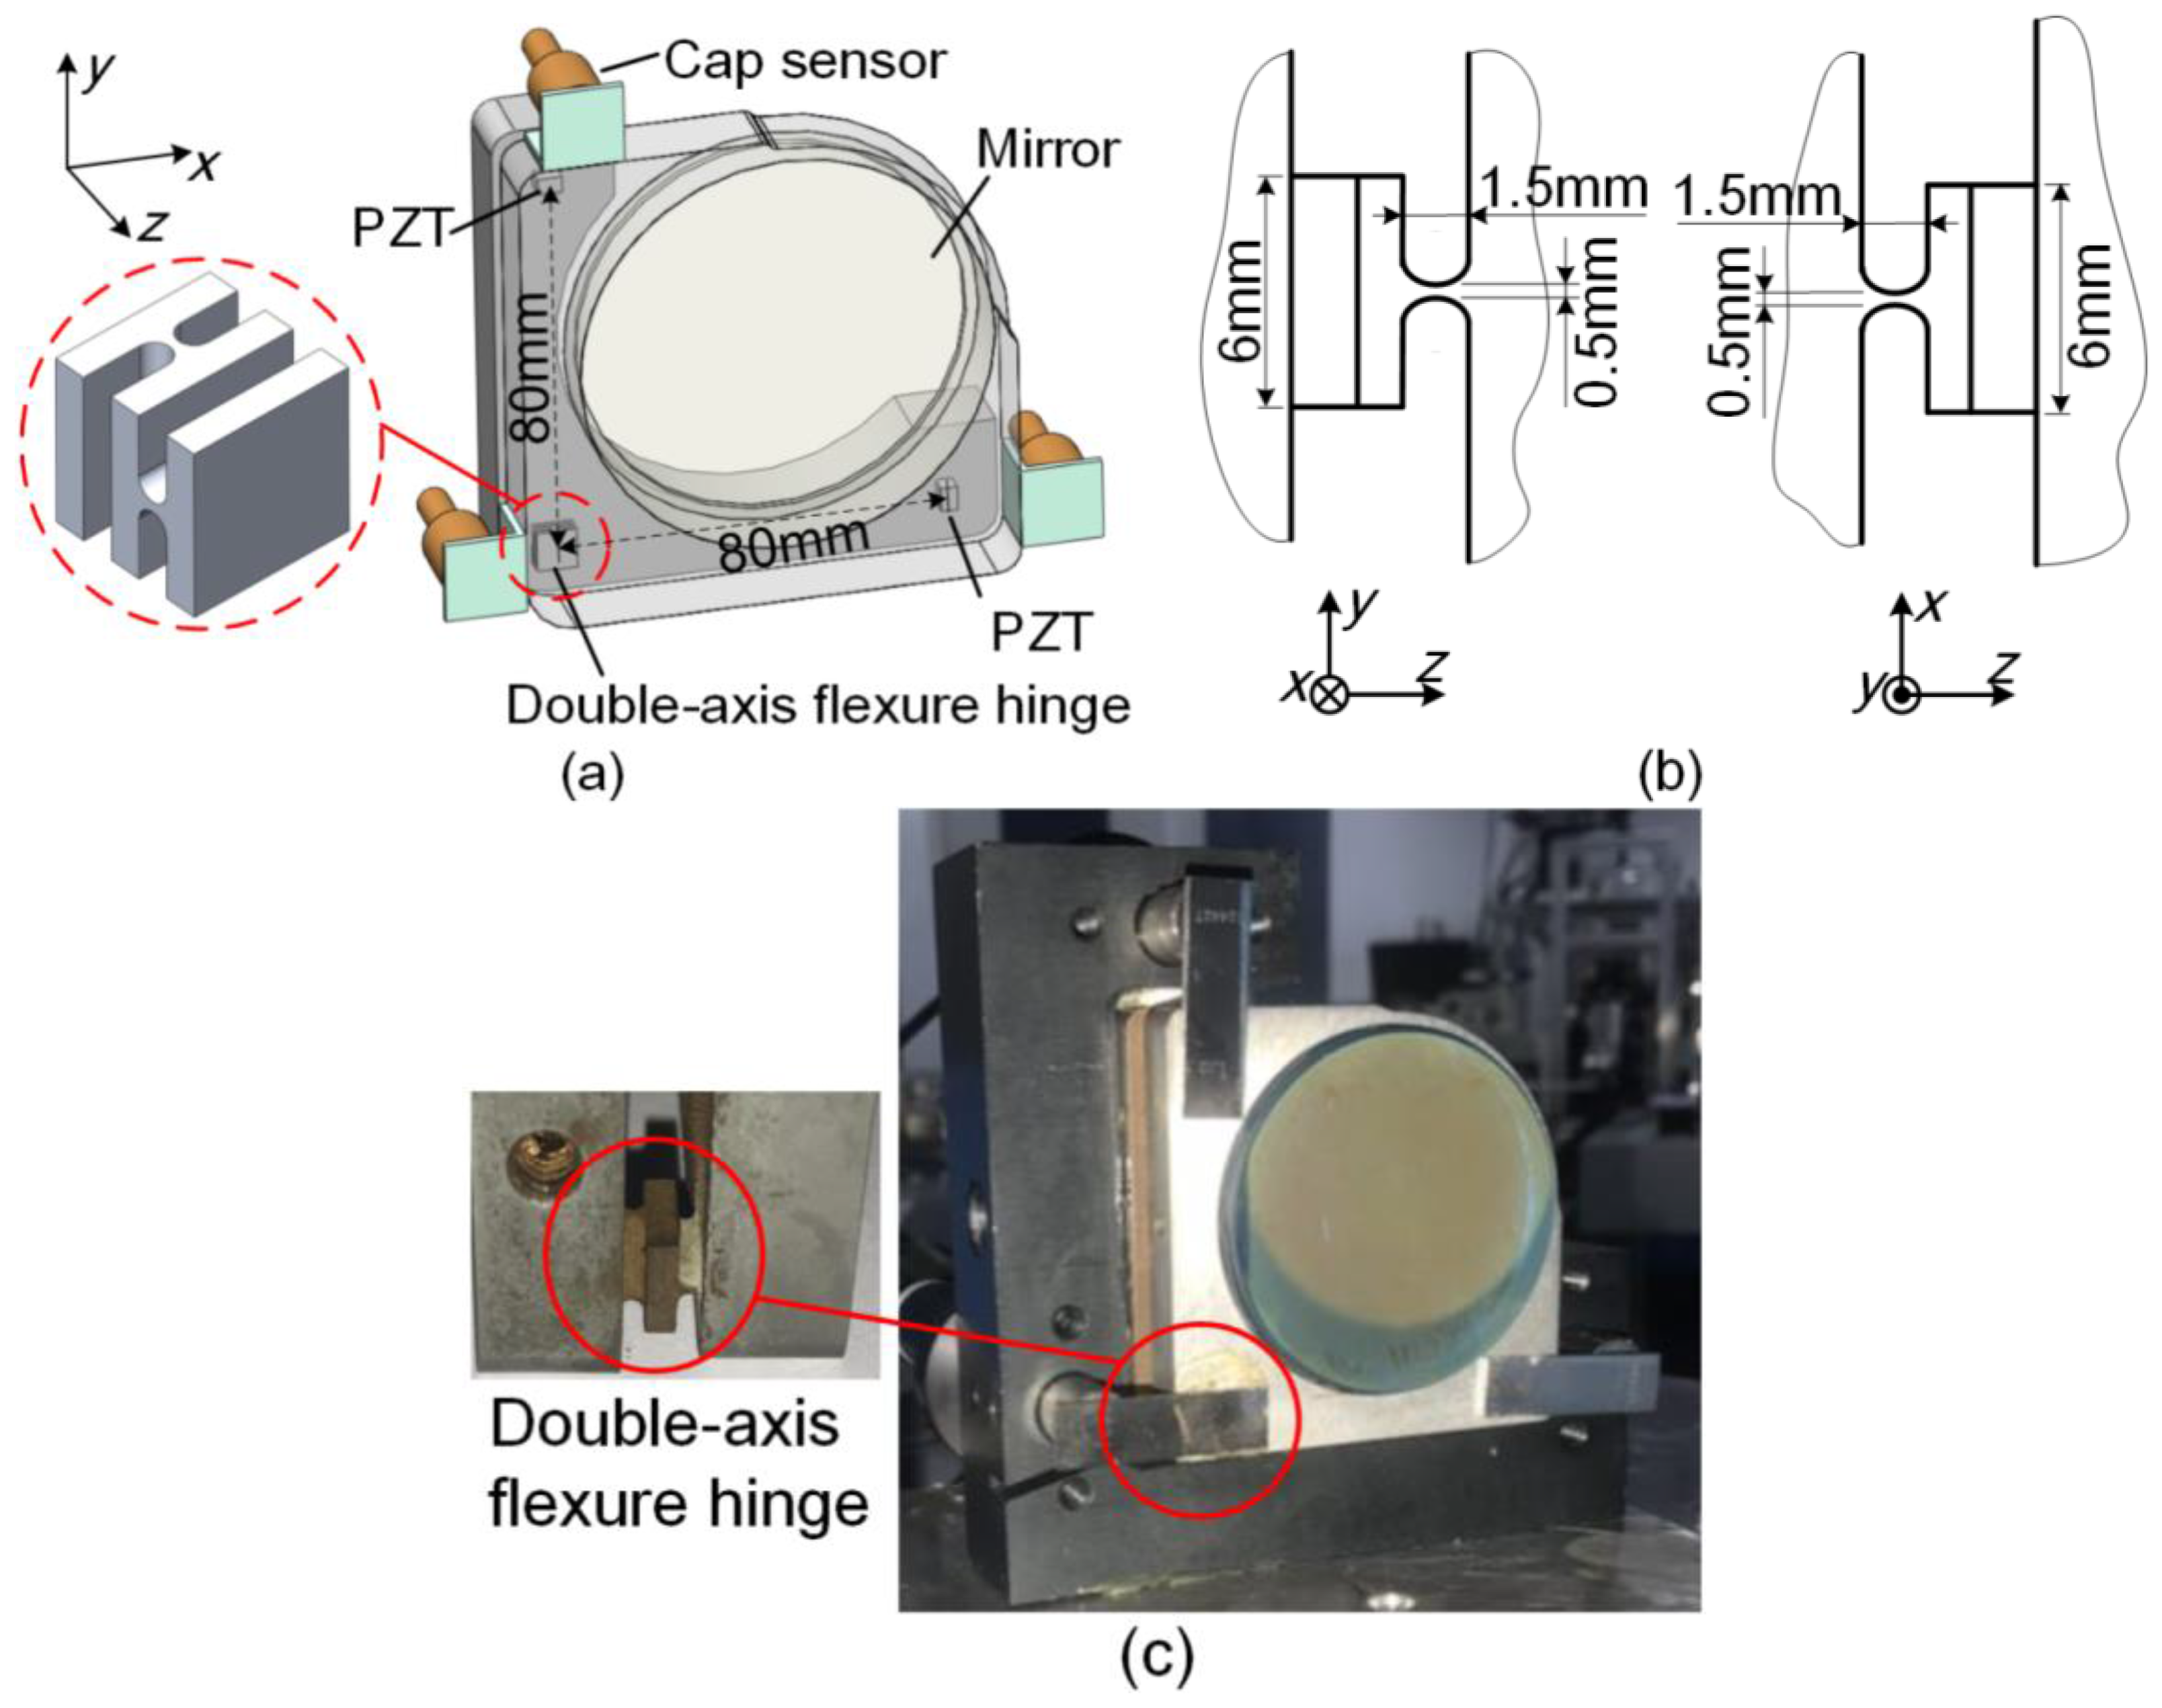 Sensors | Free Full-Text | Two-Dimensional Micro-/Nanoradian Angle Generator  with High Resolution and Repeatability Based on Piezo-Driven Double-Axis  Flexure Hinge and Three Capacitive Sensors